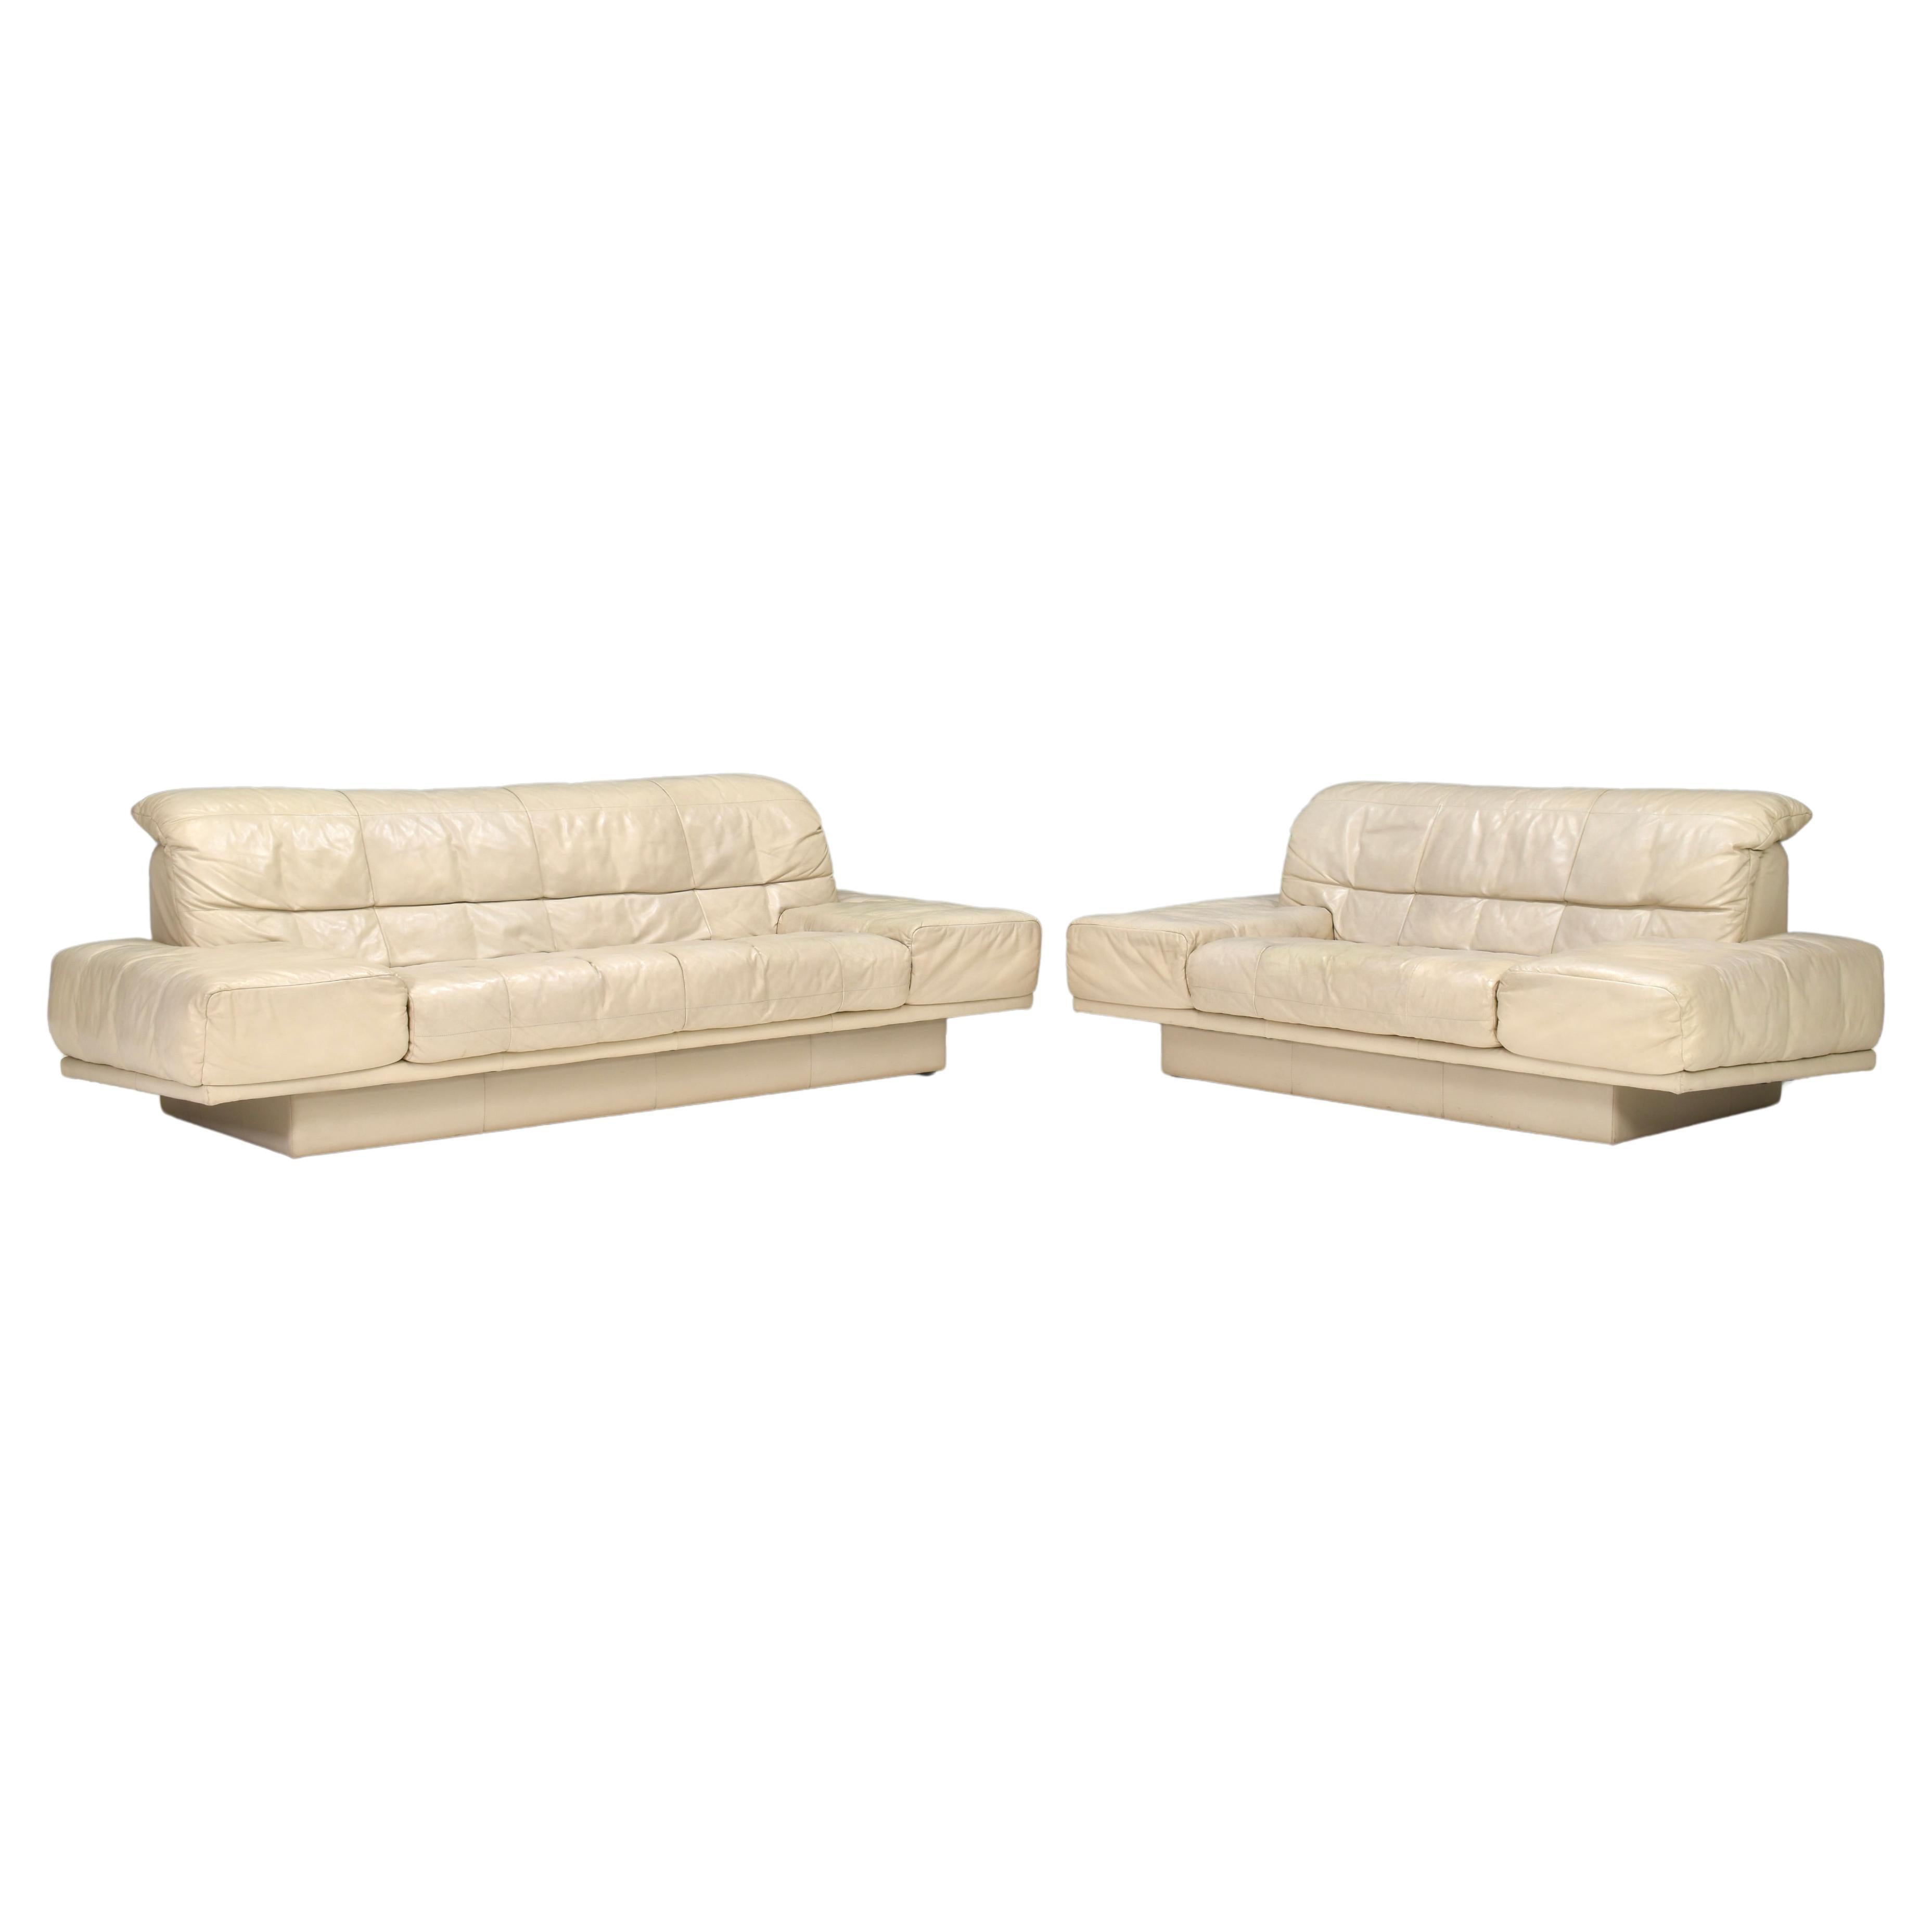 Pair of Rolf Benz sofa’s 2-seat and 3-seat – Germany, circa 1980-1990 For Sale